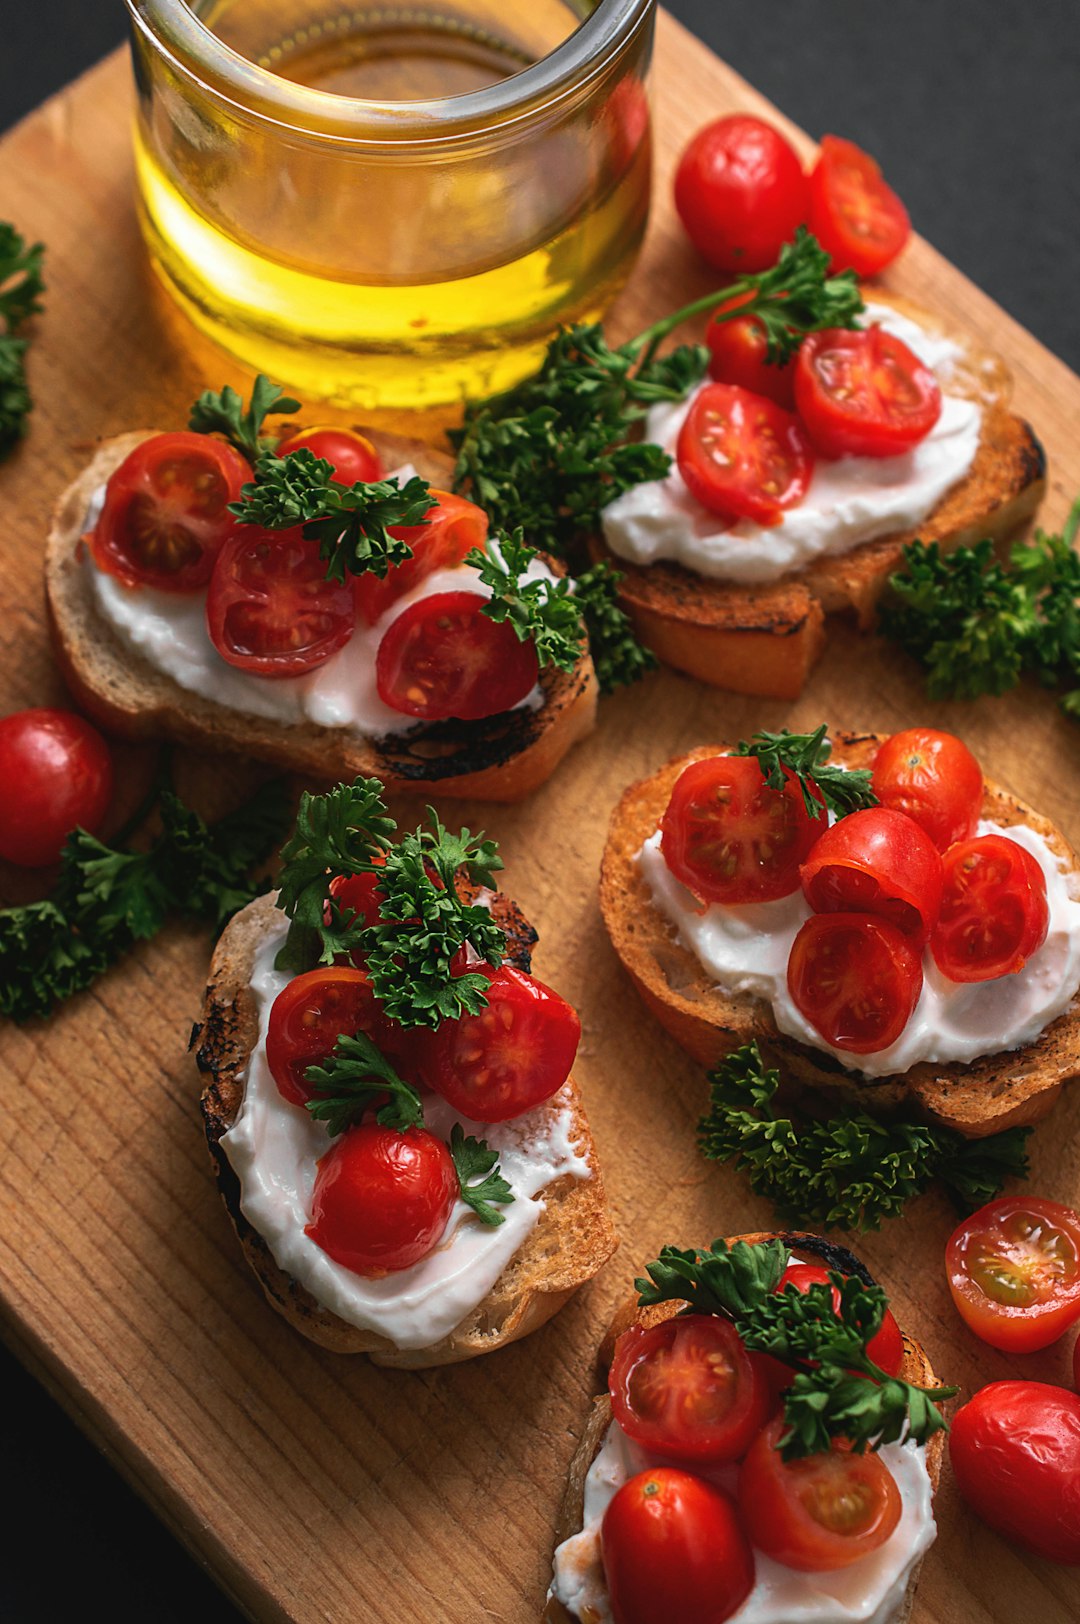 sliced tomato and green vegetable on brown bread